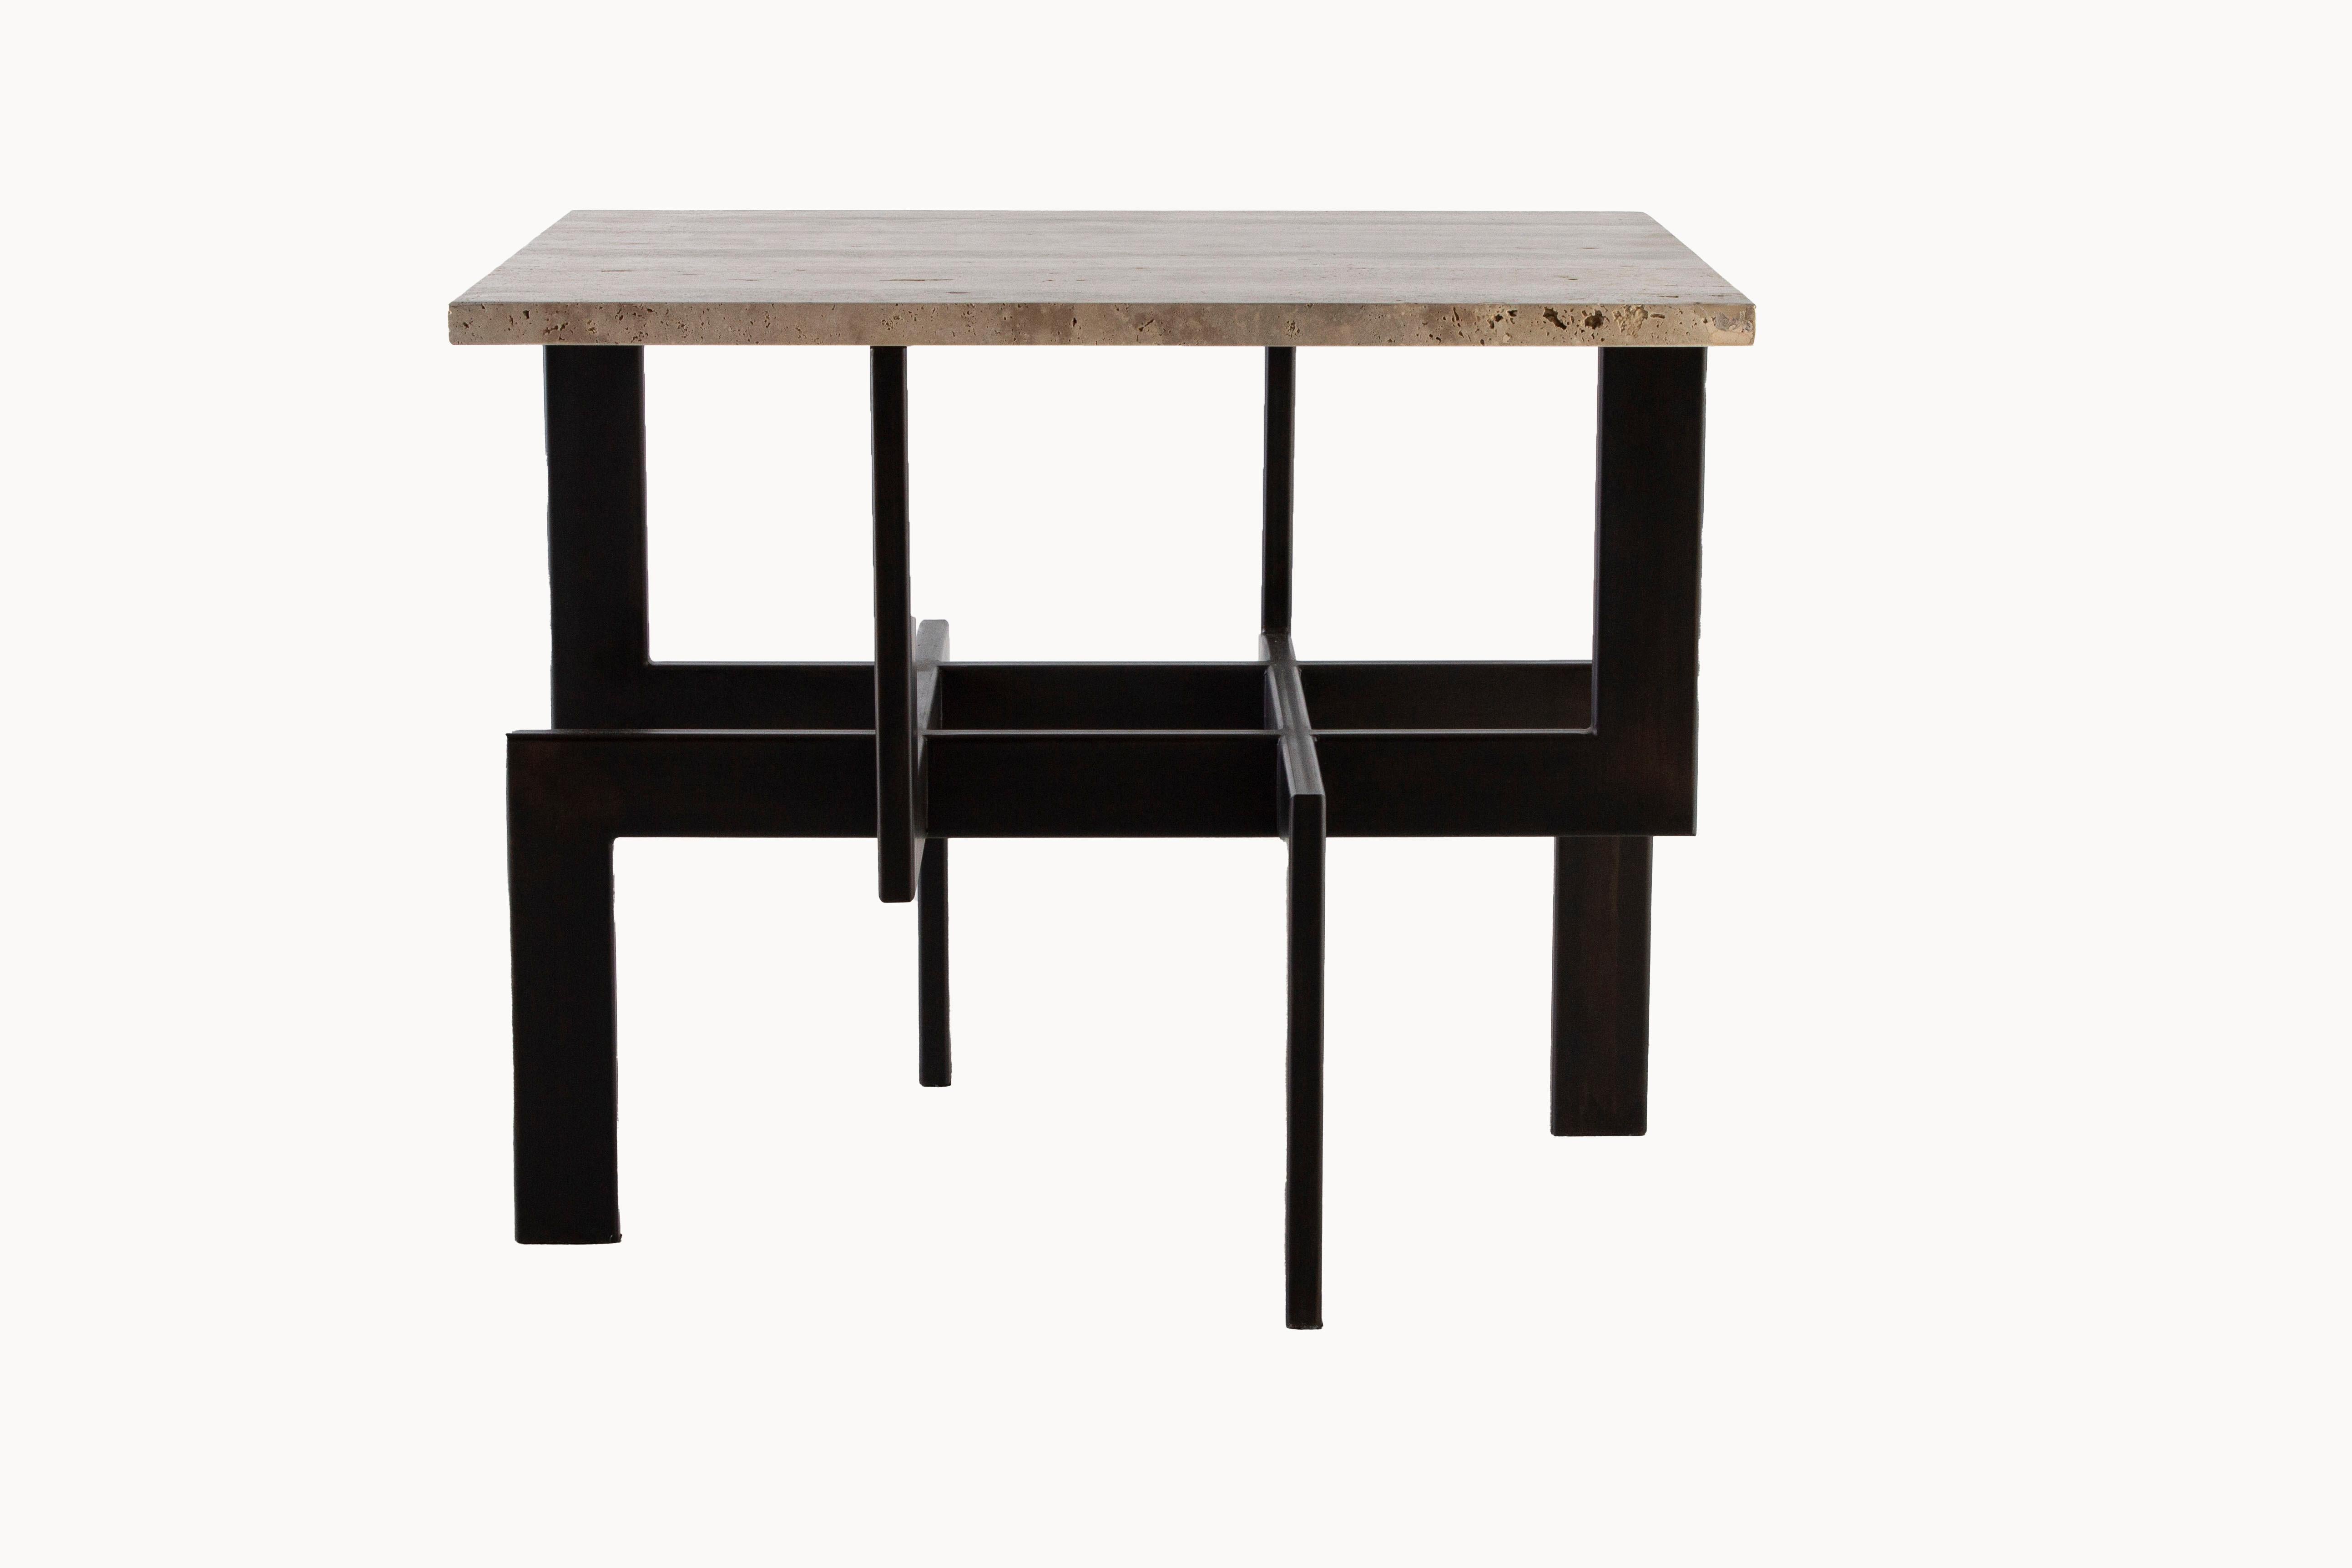 American Modernist Steel Ebony Side Table with Silver Travertine Top